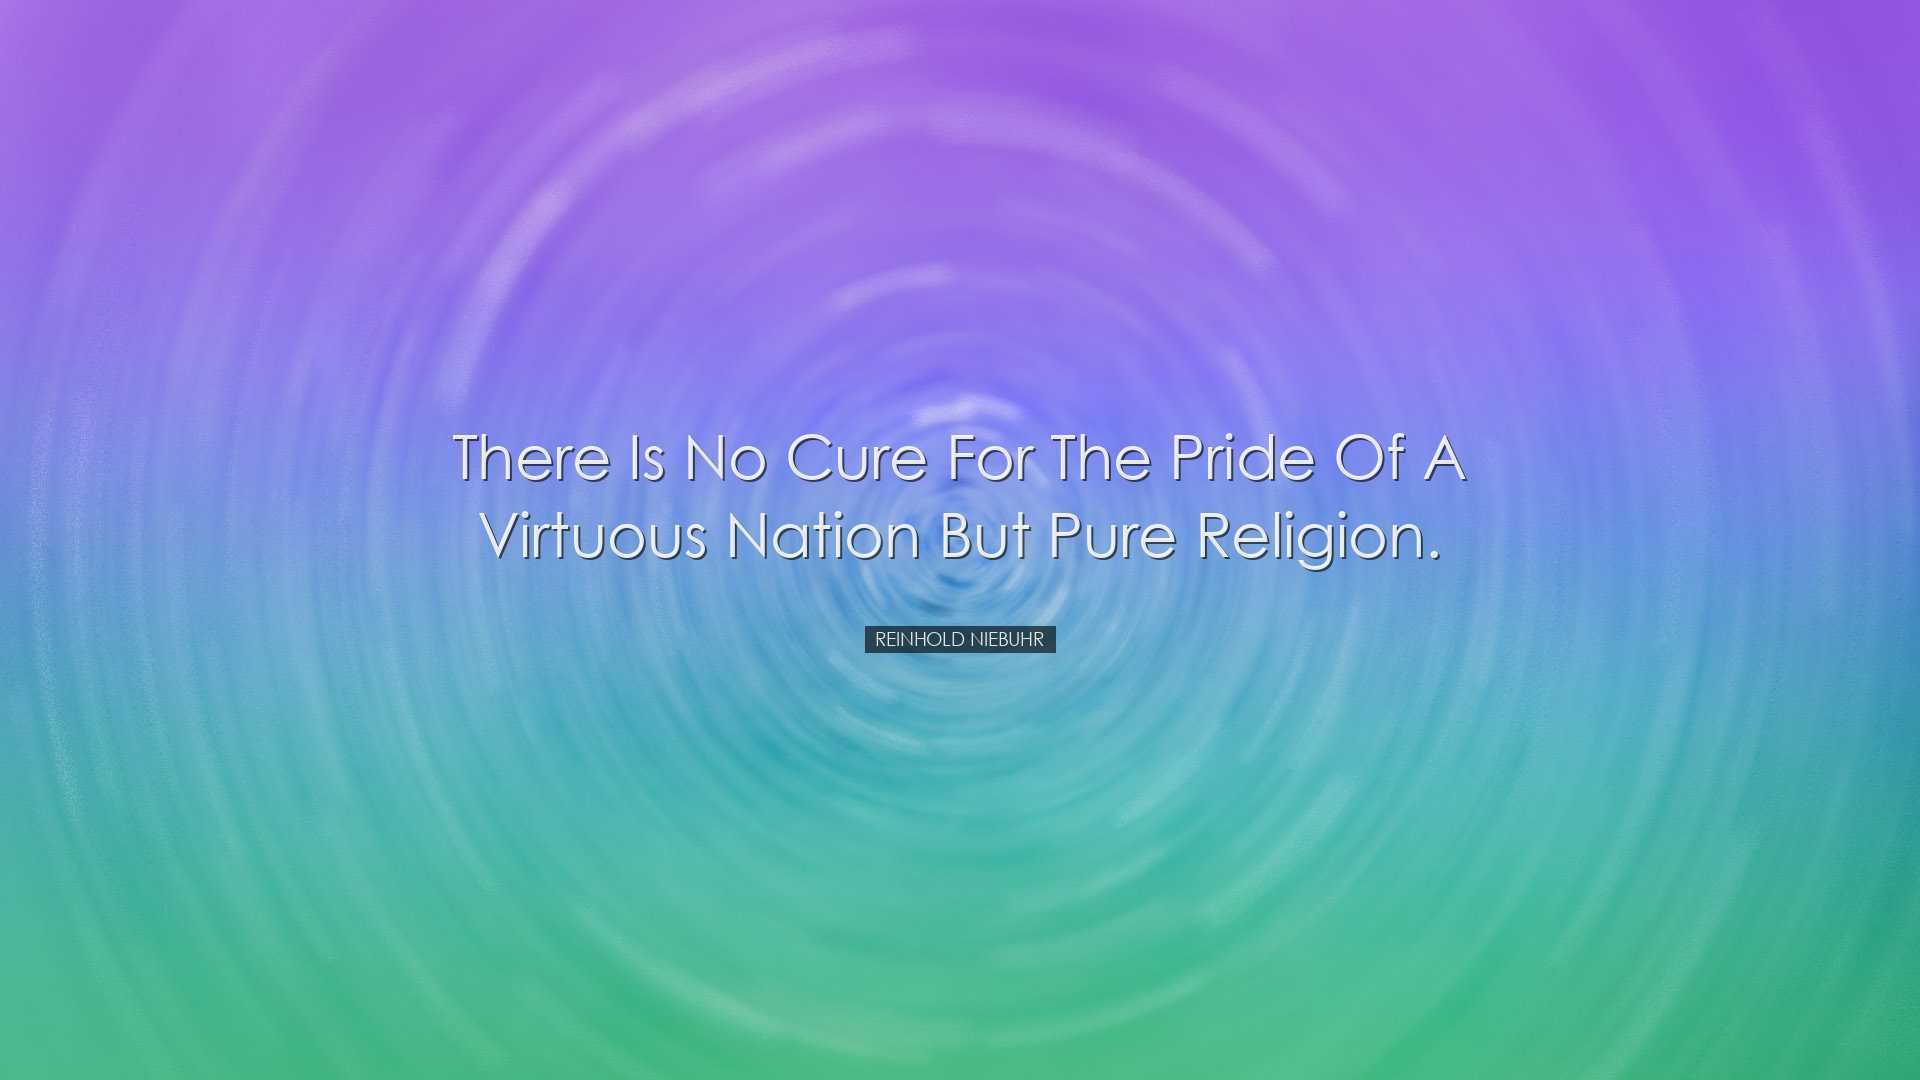 There is no cure for the pride of a virtuous nation but pure relig